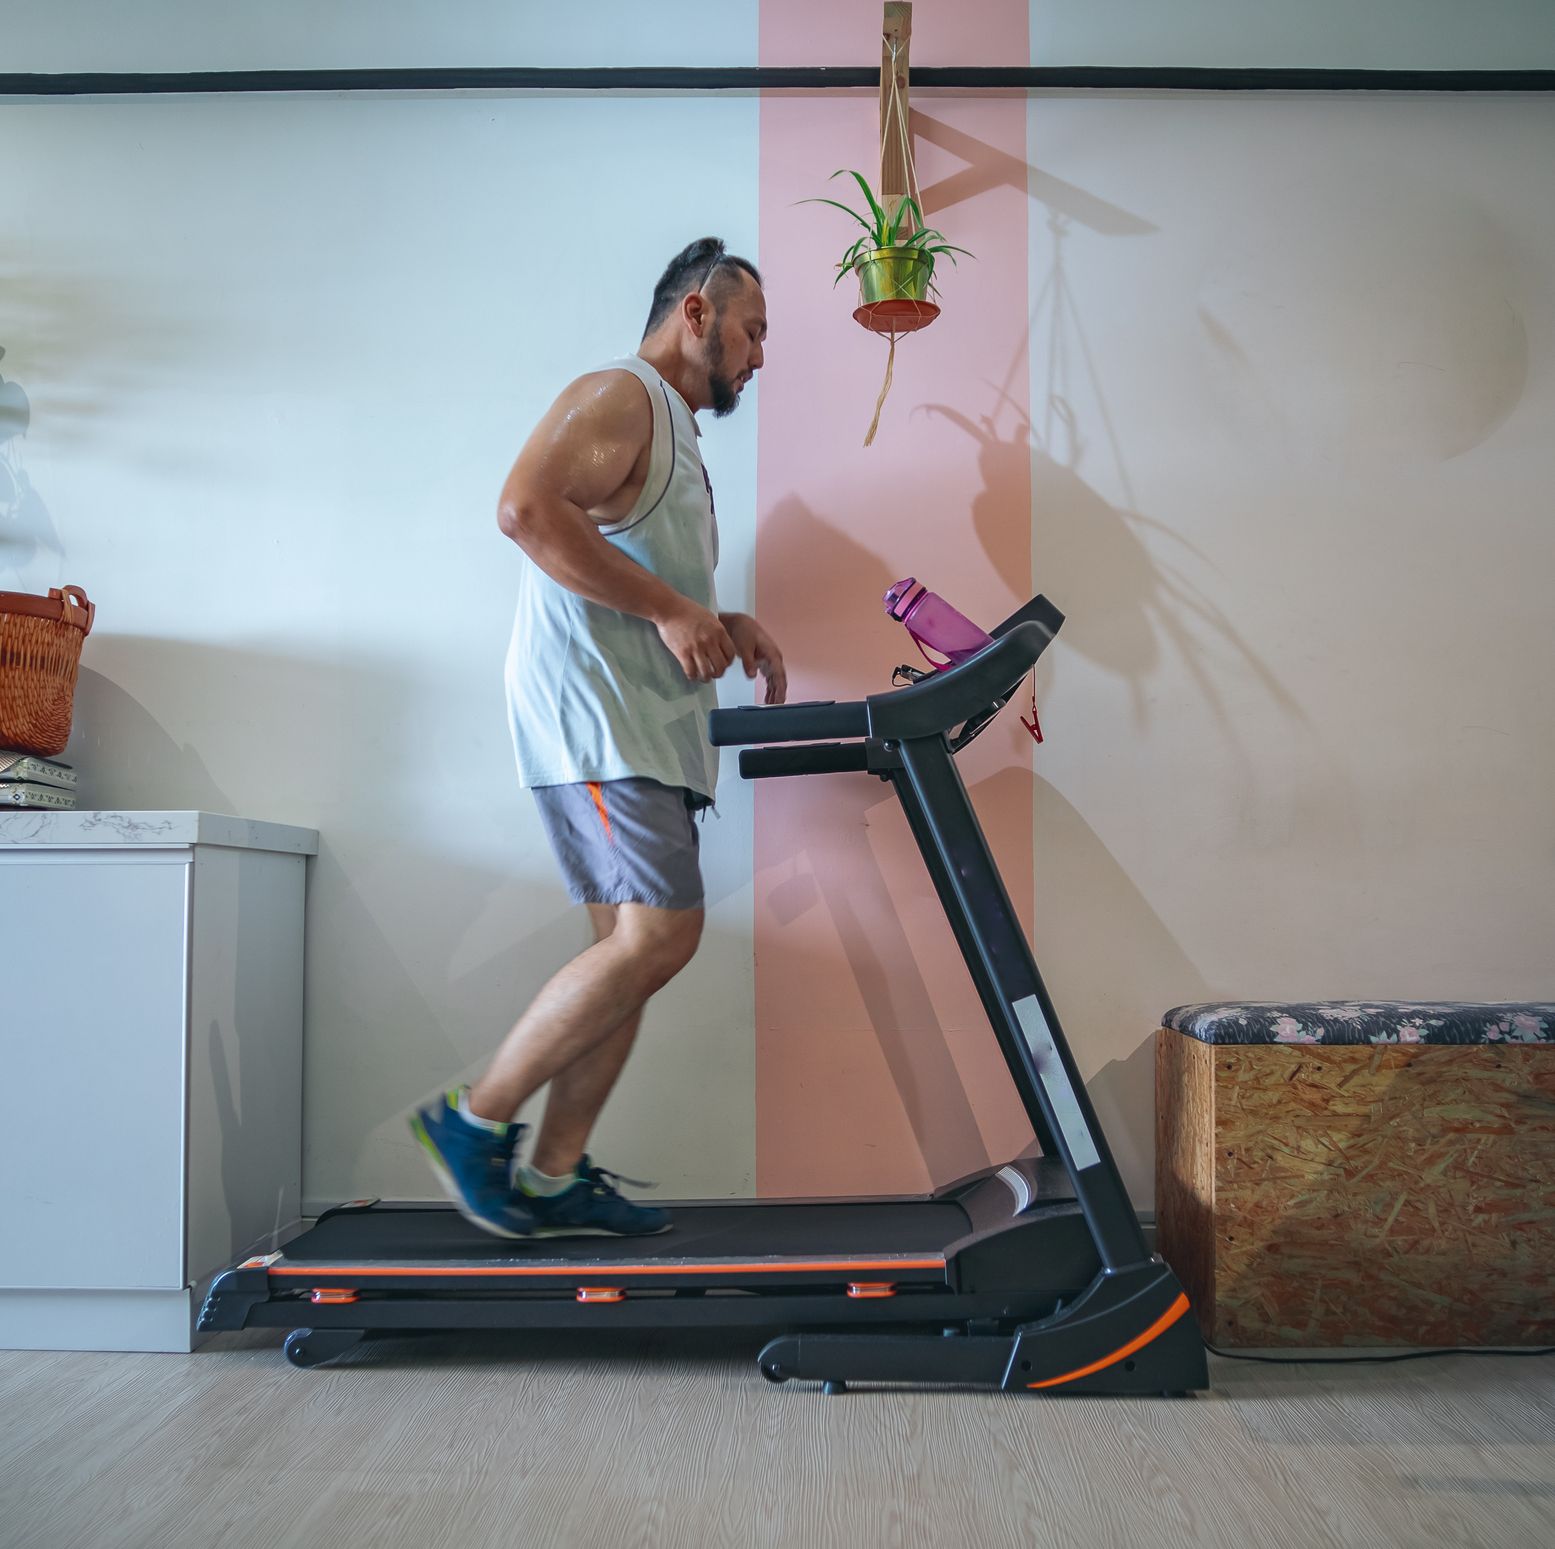 Steady State Cardio Can Still Fit in Your Workouts. Here's How.